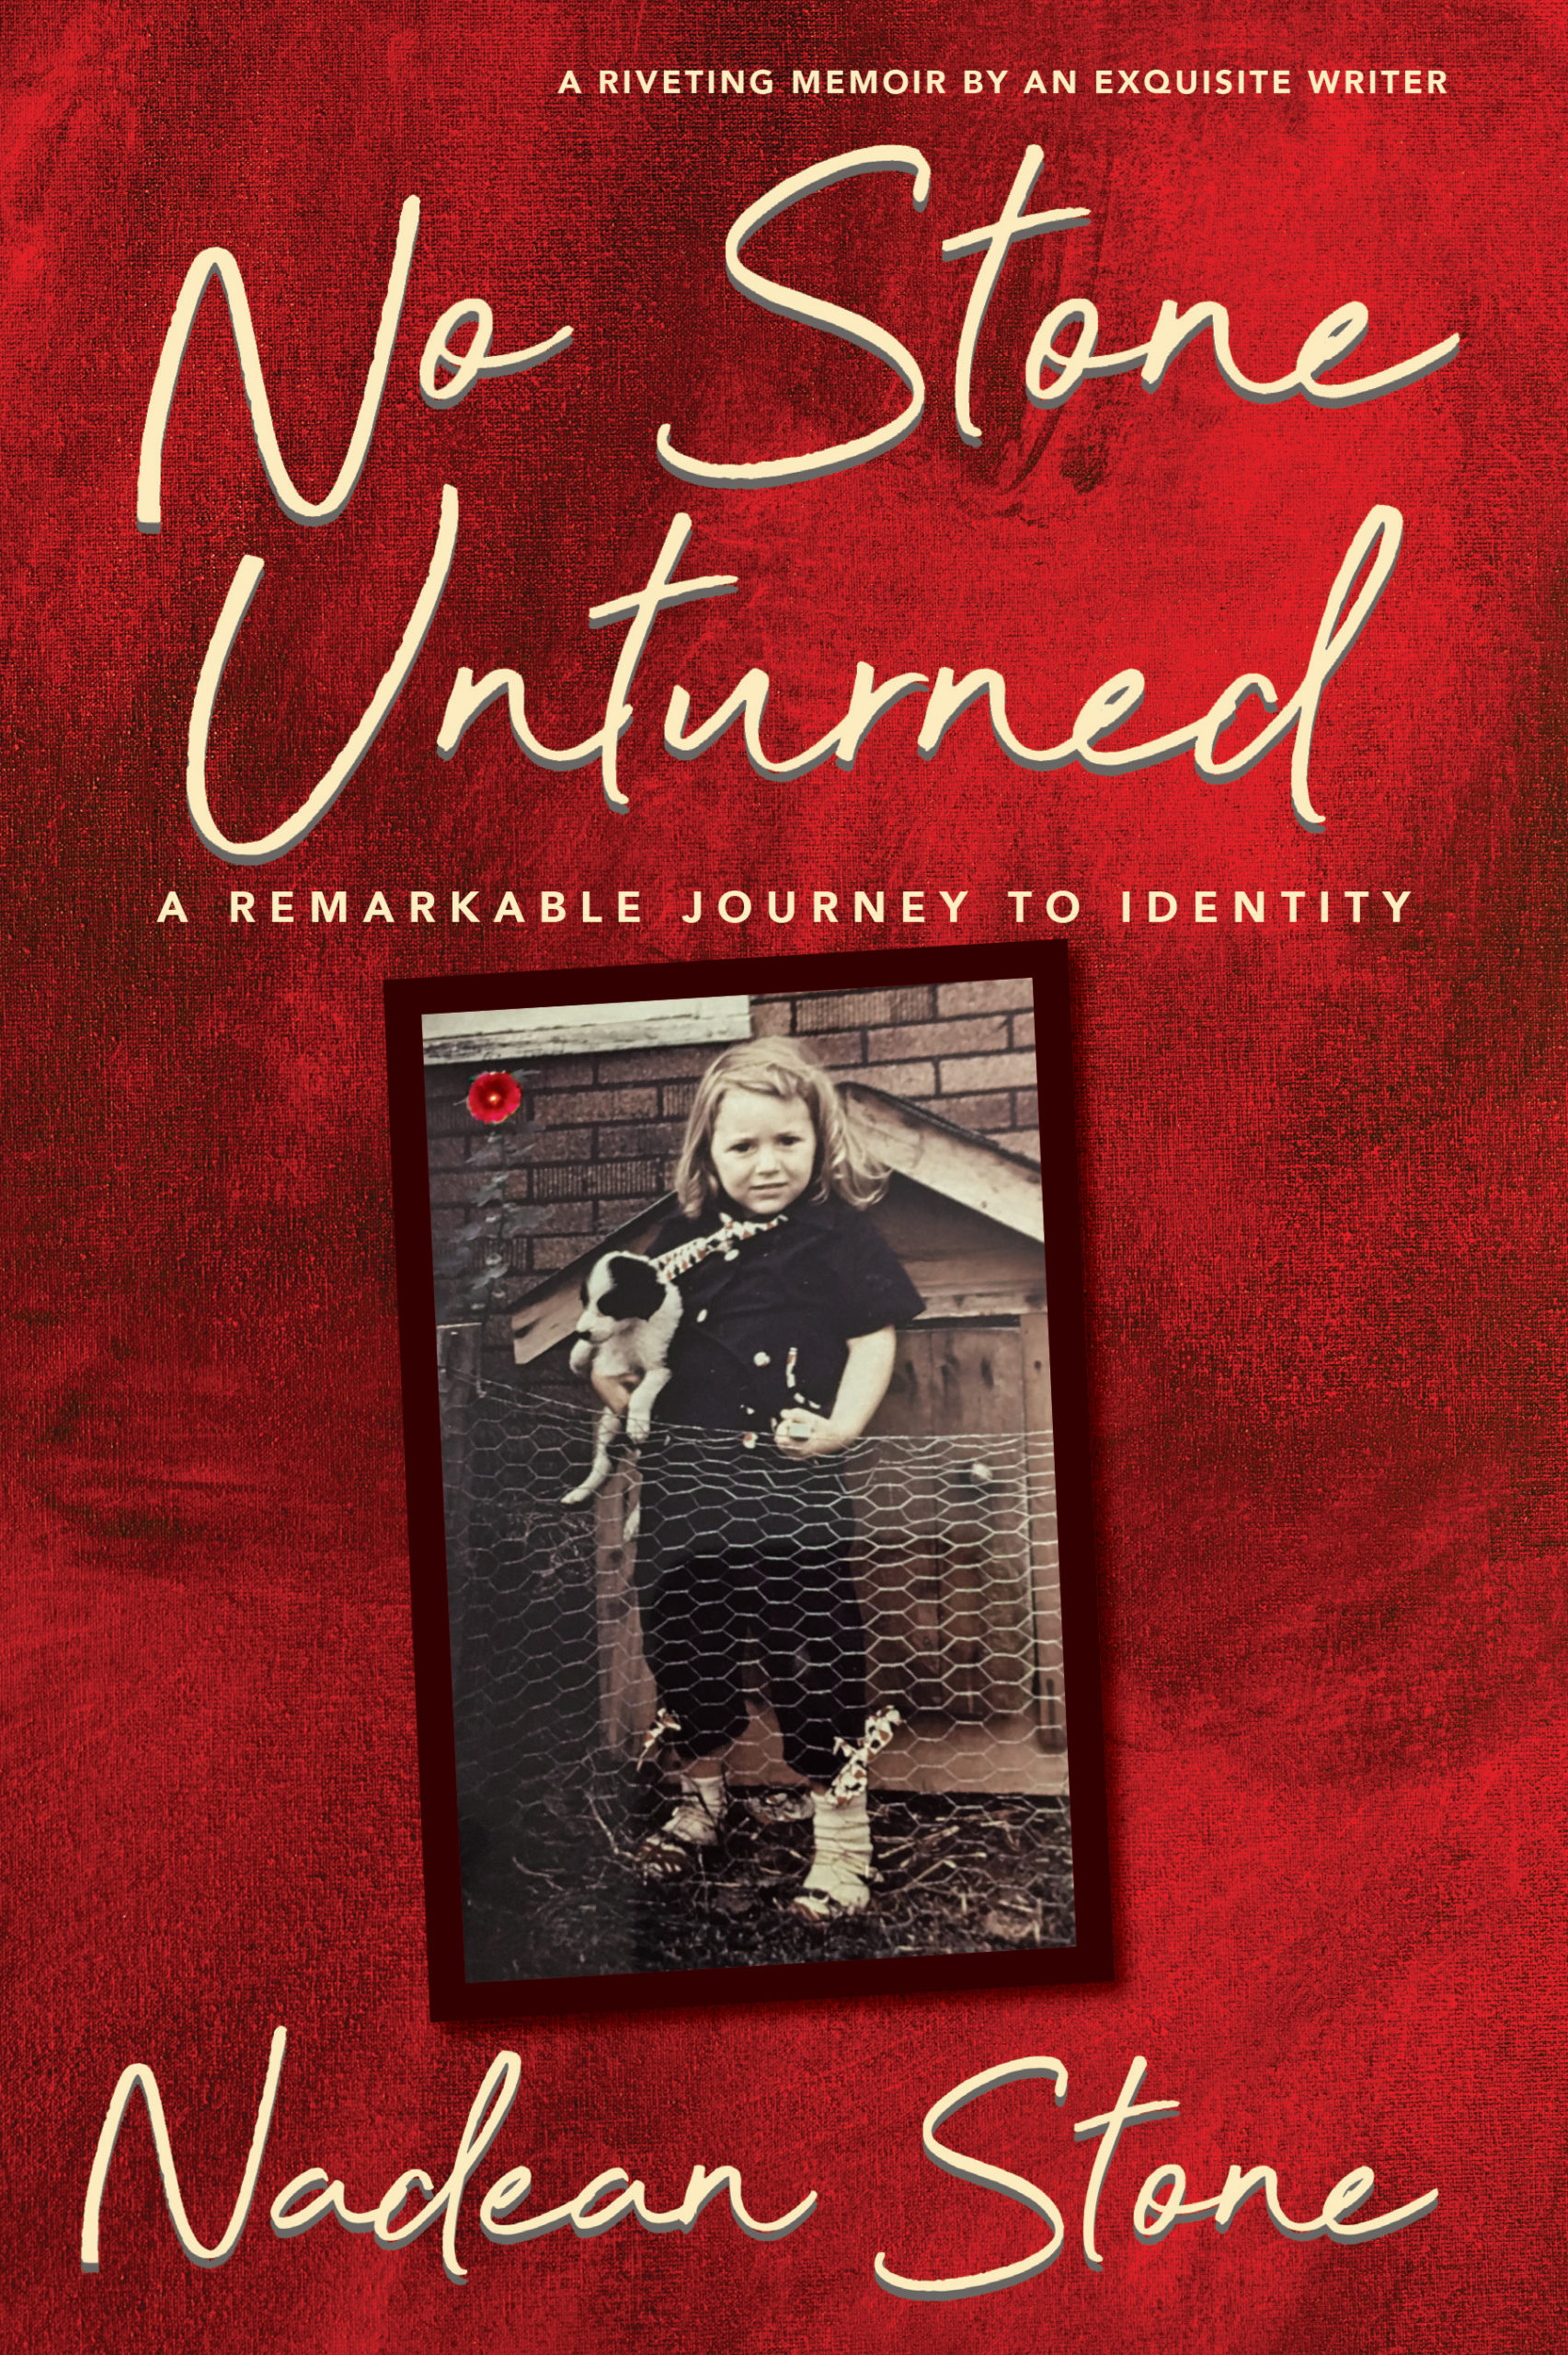 No Stone Unturned: A Remarkable Journey to Identity by Nadean Stone